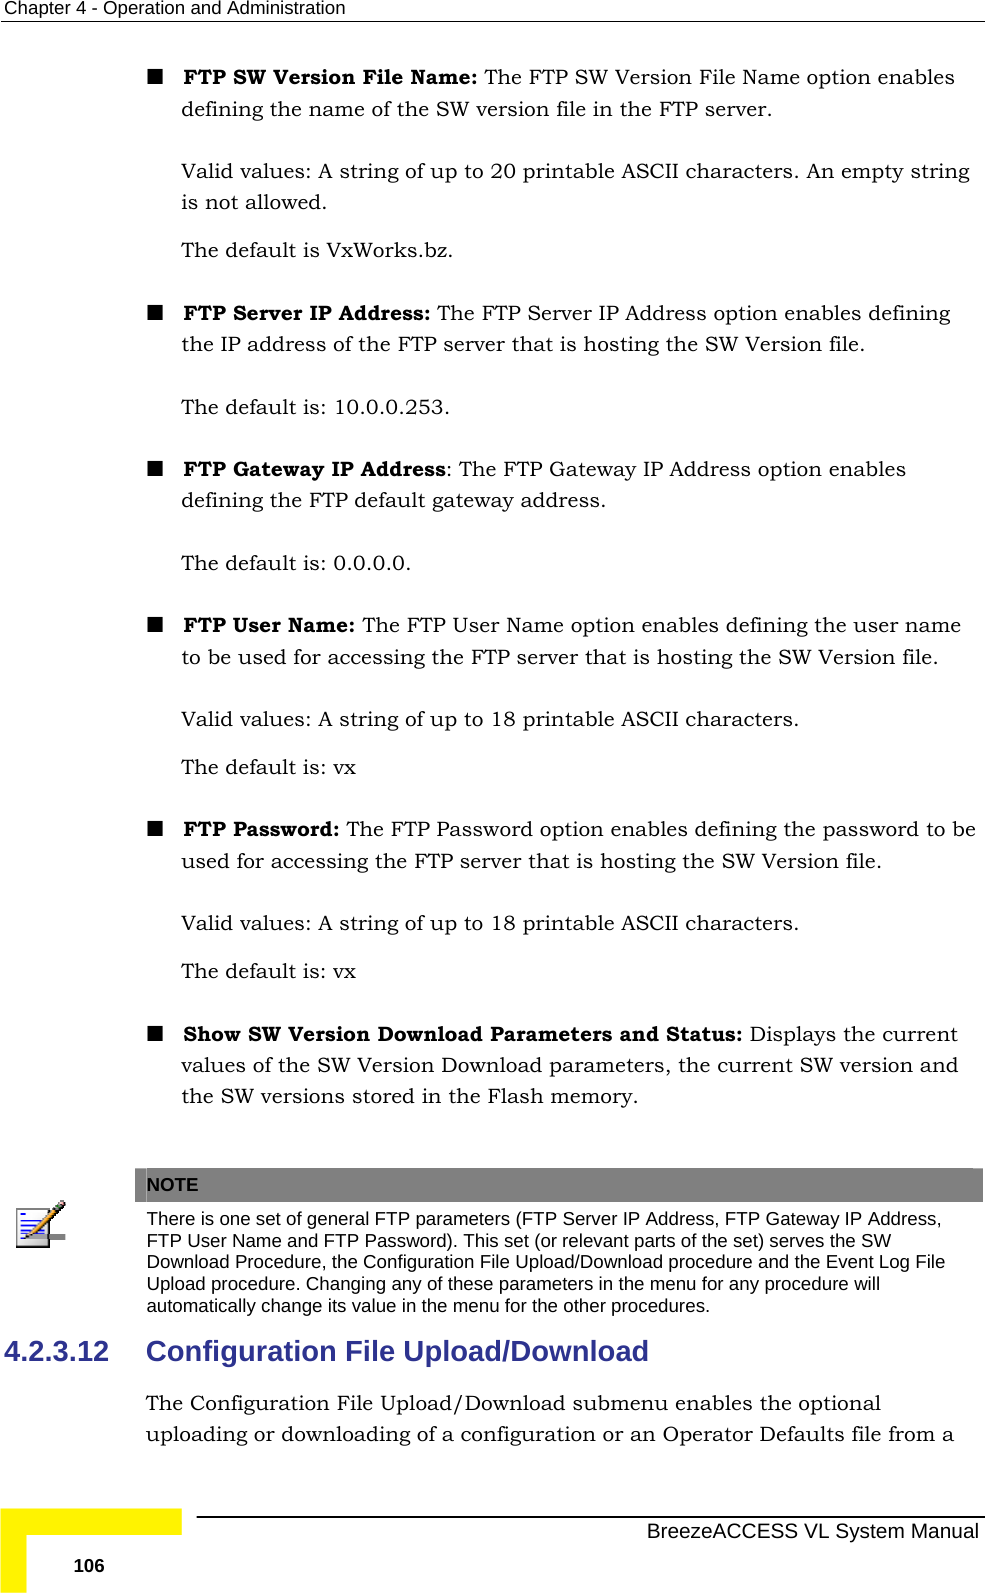 Chapter  4 - Operation and Administration   BreezeACCESS VL System Manual 106  FTP SW Version File Name: The FTP SW Version File Name option enables defining the name of the SW version file in the FTP server.  Valid values: A string of up to 20 printable ASCII characters. An empty string is not allowed.  The default is VxWorks.bz.   FTP Server IP Address: The FTP Server IP Address option enables defining the IP address of the FTP server that is hosting the SW Version file.  The default is: 10.0.0.253.  FTP Gateway IP Address: The FTP Gateway IP Address option enables defining the FTP default gateway address. The default is: 0.0.0.0.   FTP User Name: The FTP User Name option enables defining the user name to be used for accessing the FTP server that is hosting the SW Version file.  Valid values: A string of up to 18 printable ASCII characters. The default is: vx   FTP Password: The FTP Password option enables defining the password to be used for accessing the FTP server that is hosting the SW Version file.  Valid values: A string of up to 18 printable ASCII characters. The default is: vx    Show SW Version Download Parameters and Status: Displays the current values of the SW Version Download parameters, the current SW version and the SW versions stored in the Flash memory.   NOTE  There is one set of general FTP parameters (FTP Server IP Address, FTP Gateway IP Address, FTP User Name and FTP Password). This set (or relevant parts of the set) serves the SW Download Procedure, the Configuration File Upload/Download procedure and the Event Log File Upload procedure. Changing any of these parameters in the menu for any procedure will automatically change its value in the menu for the other procedures. 4.2.3.12  Configuration File Upload/Download The Configuration File Upload/Download submenu enables the optional uploading or downloading of a configuration or an Operator Defaults file from a 